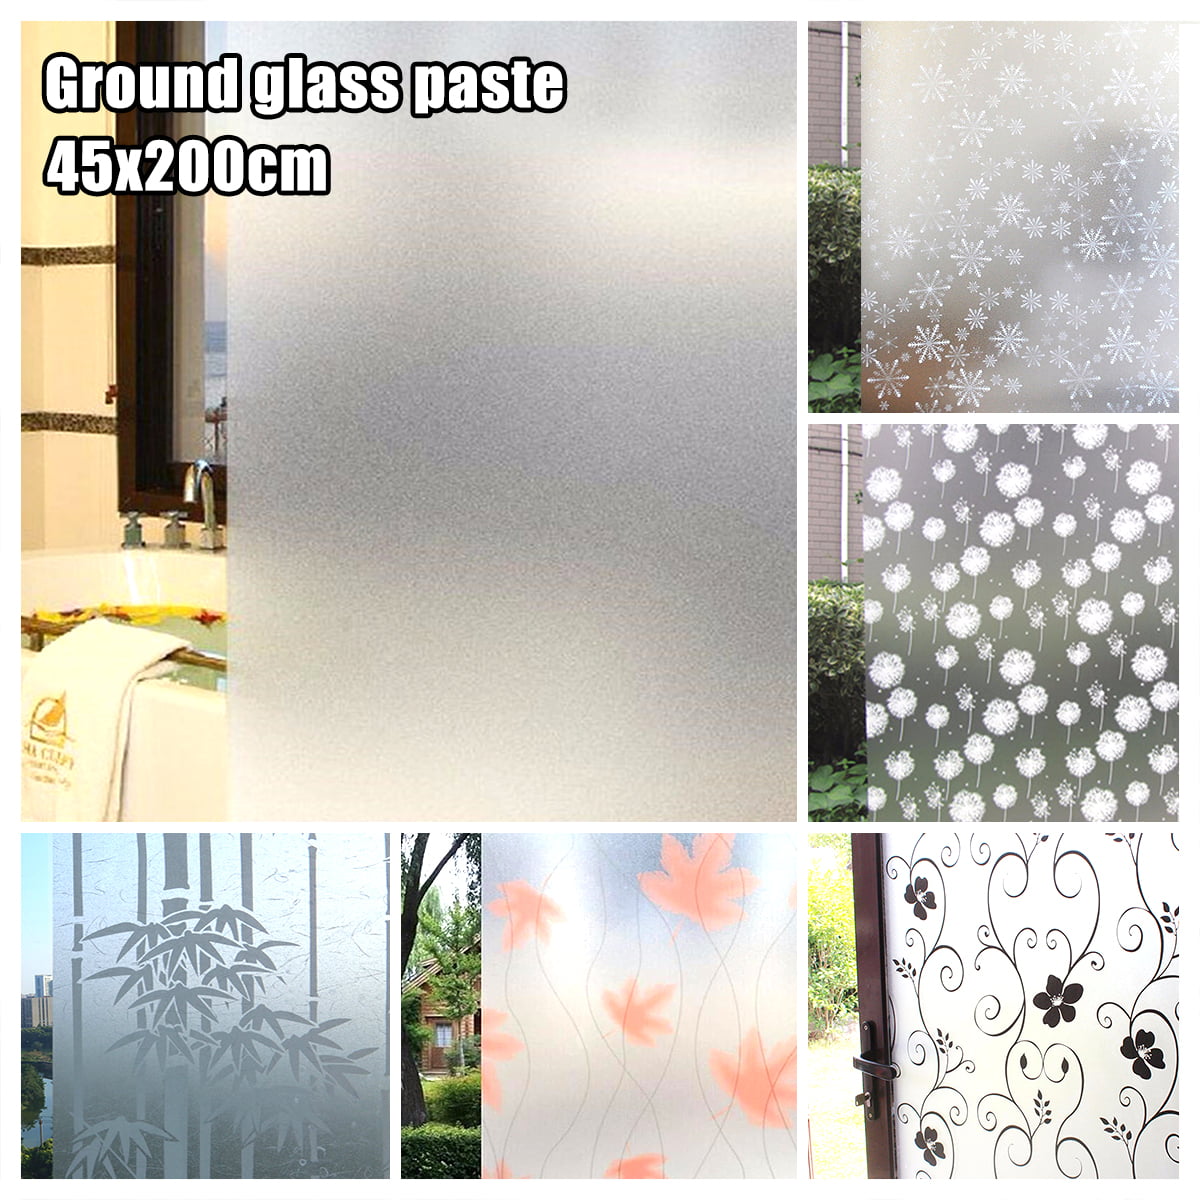 PVC Waterproof Window Film Static Opaque Glass Sticker Decal Privacy Home Decor 